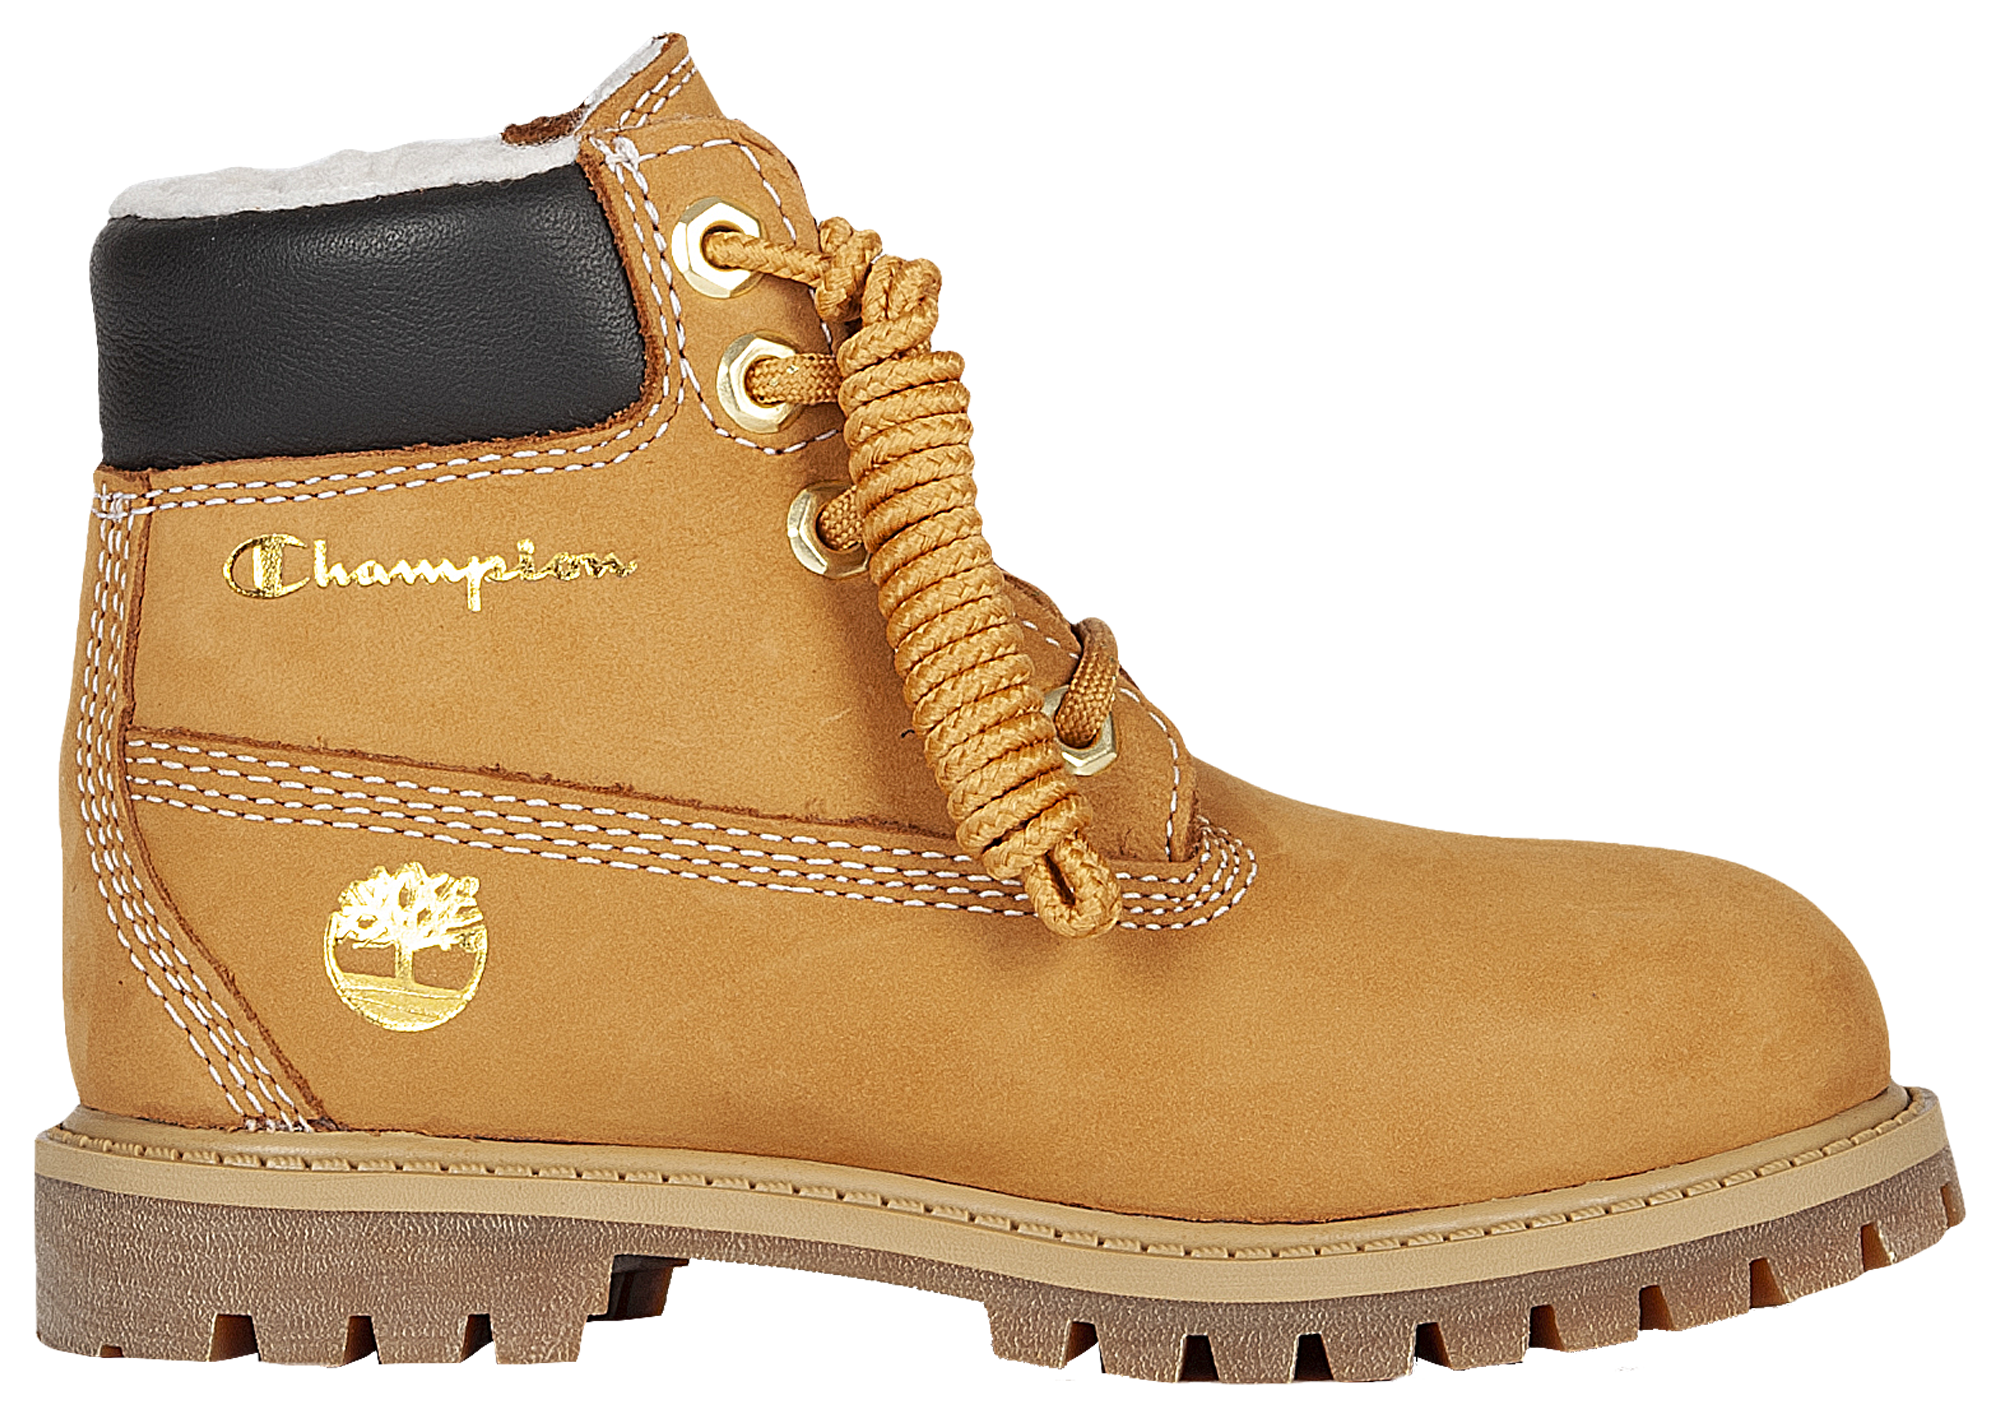 champion timberland toddler boots